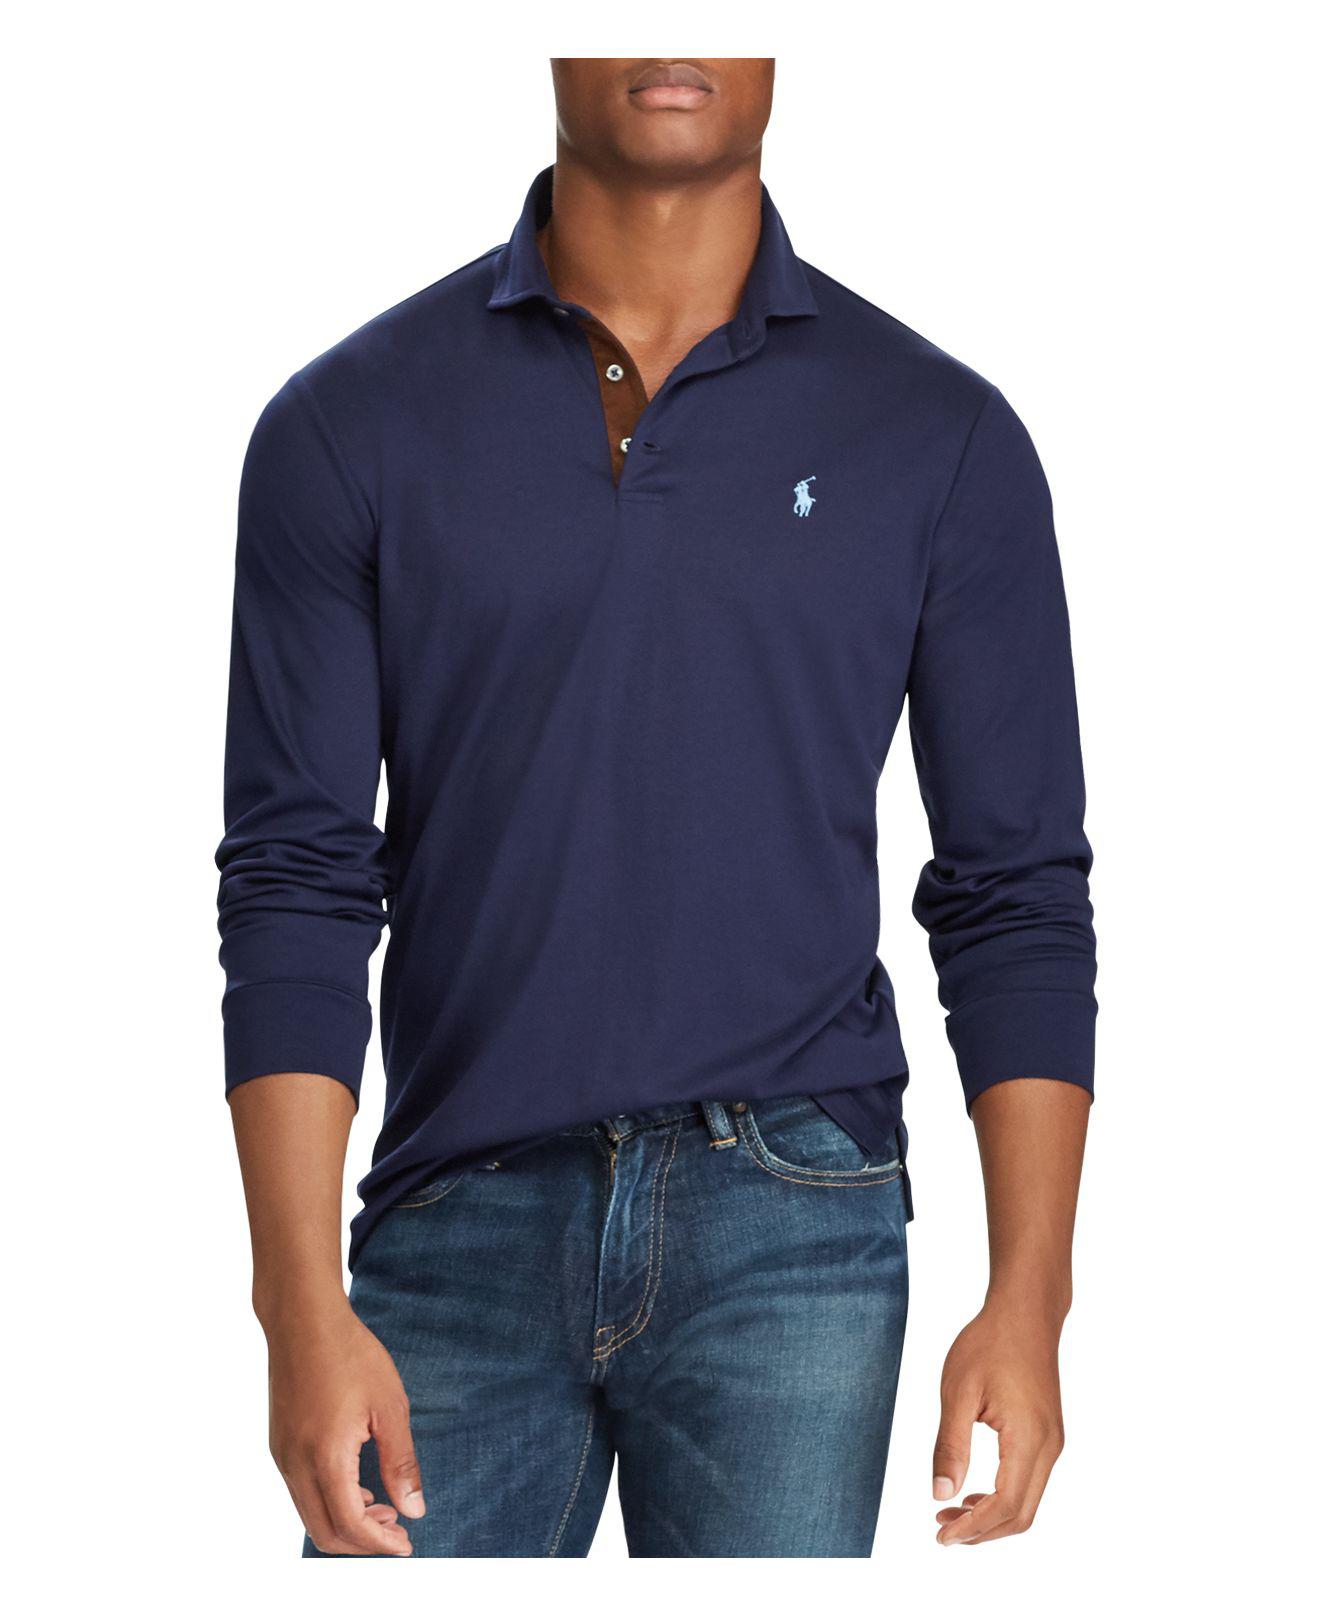 Polo Ralph Lauren Classic Fit Soft-touch Long Sleeve Polo Shirt in Navy